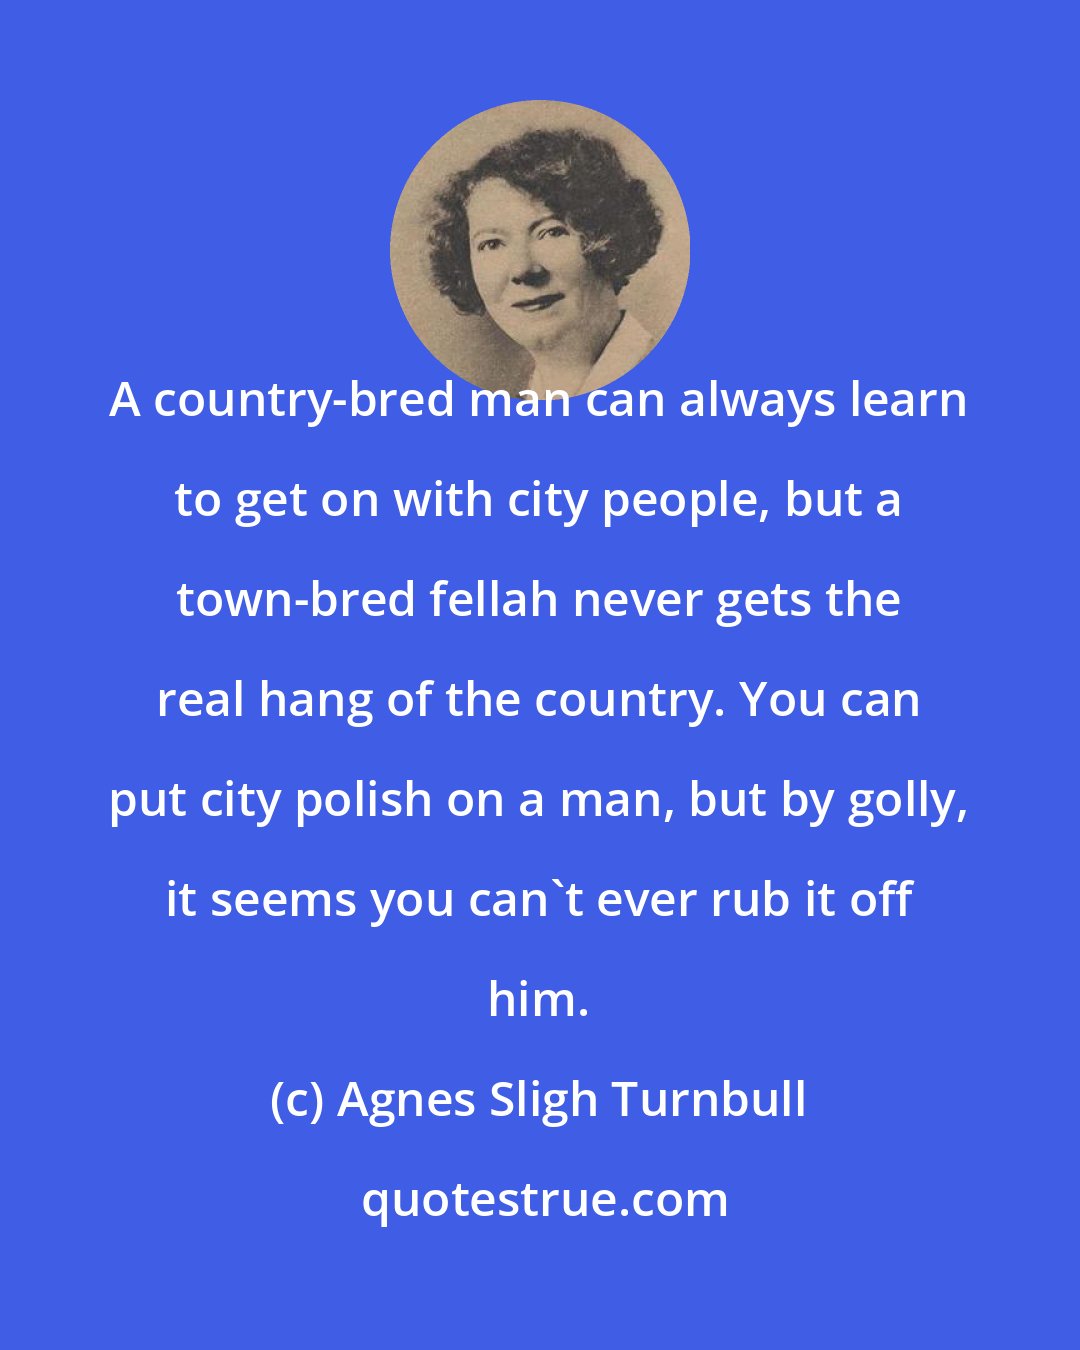 Agnes Sligh Turnbull: A country-bred man can always learn to get on with city people, but a town-bred fellah never gets the real hang of the country. You can put city polish on a man, but by golly, it seems you can't ever rub it off him.